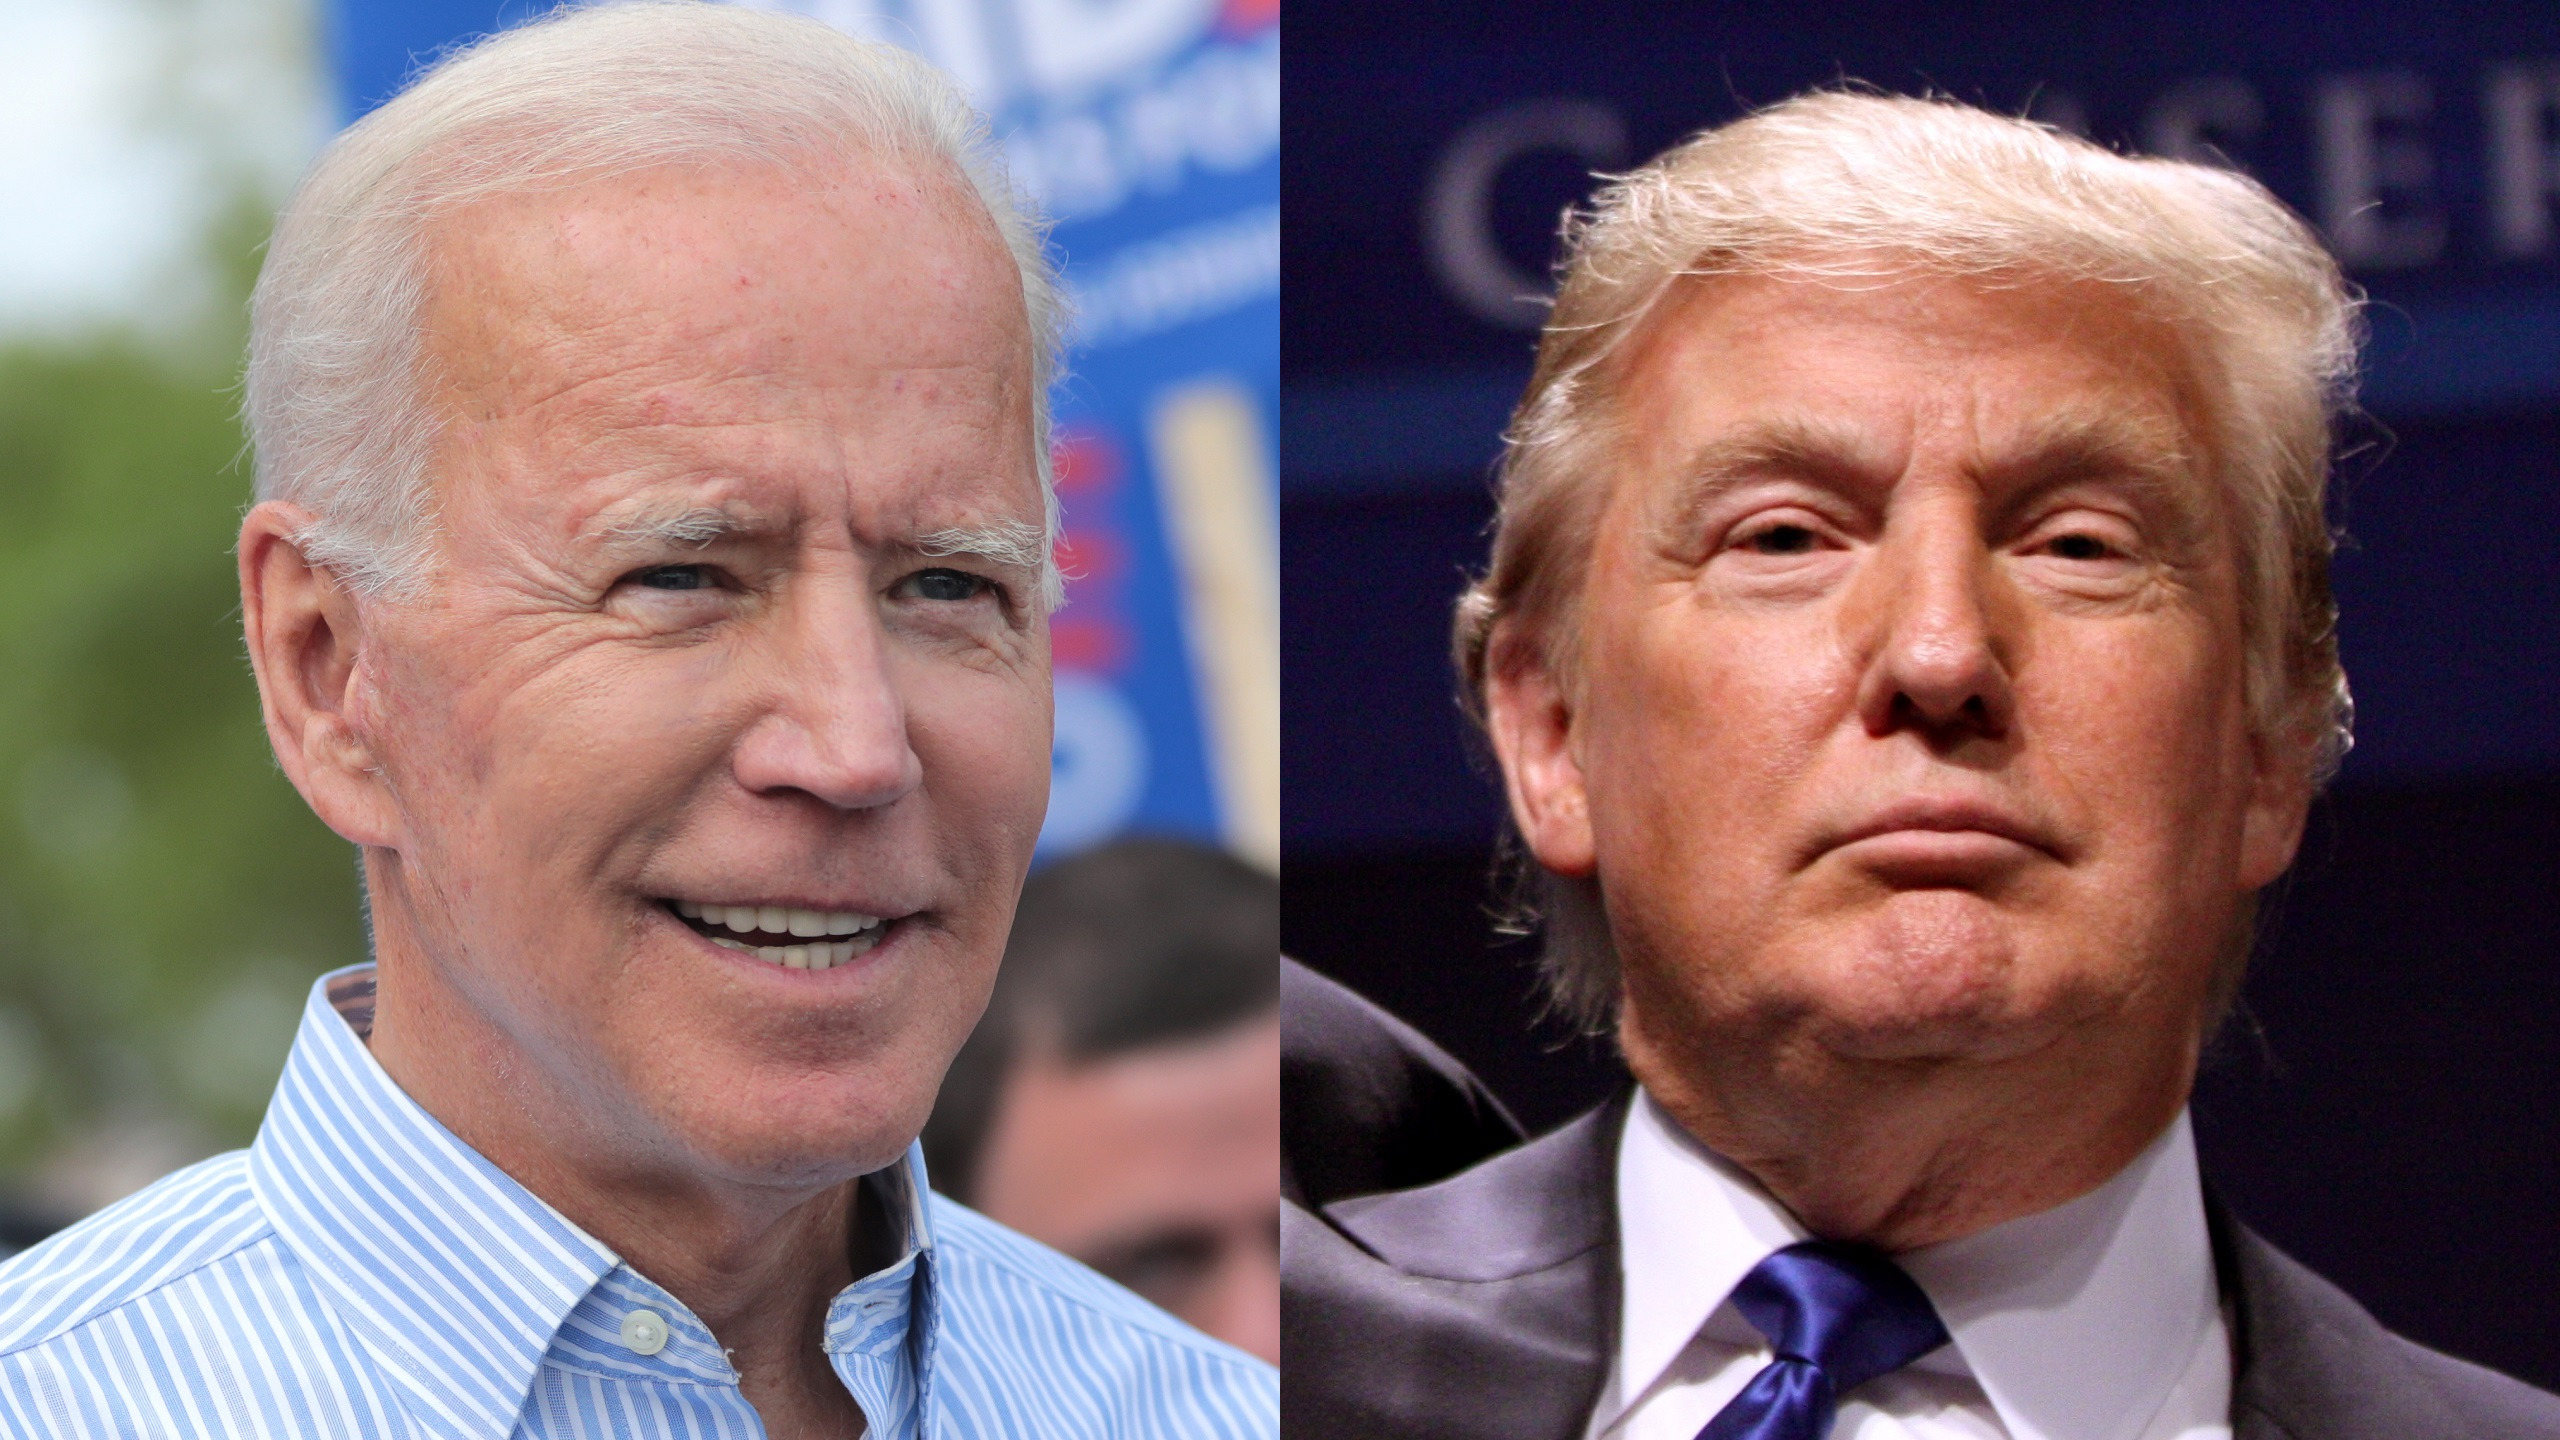 Will Biden and Trump Recompete in the Election?